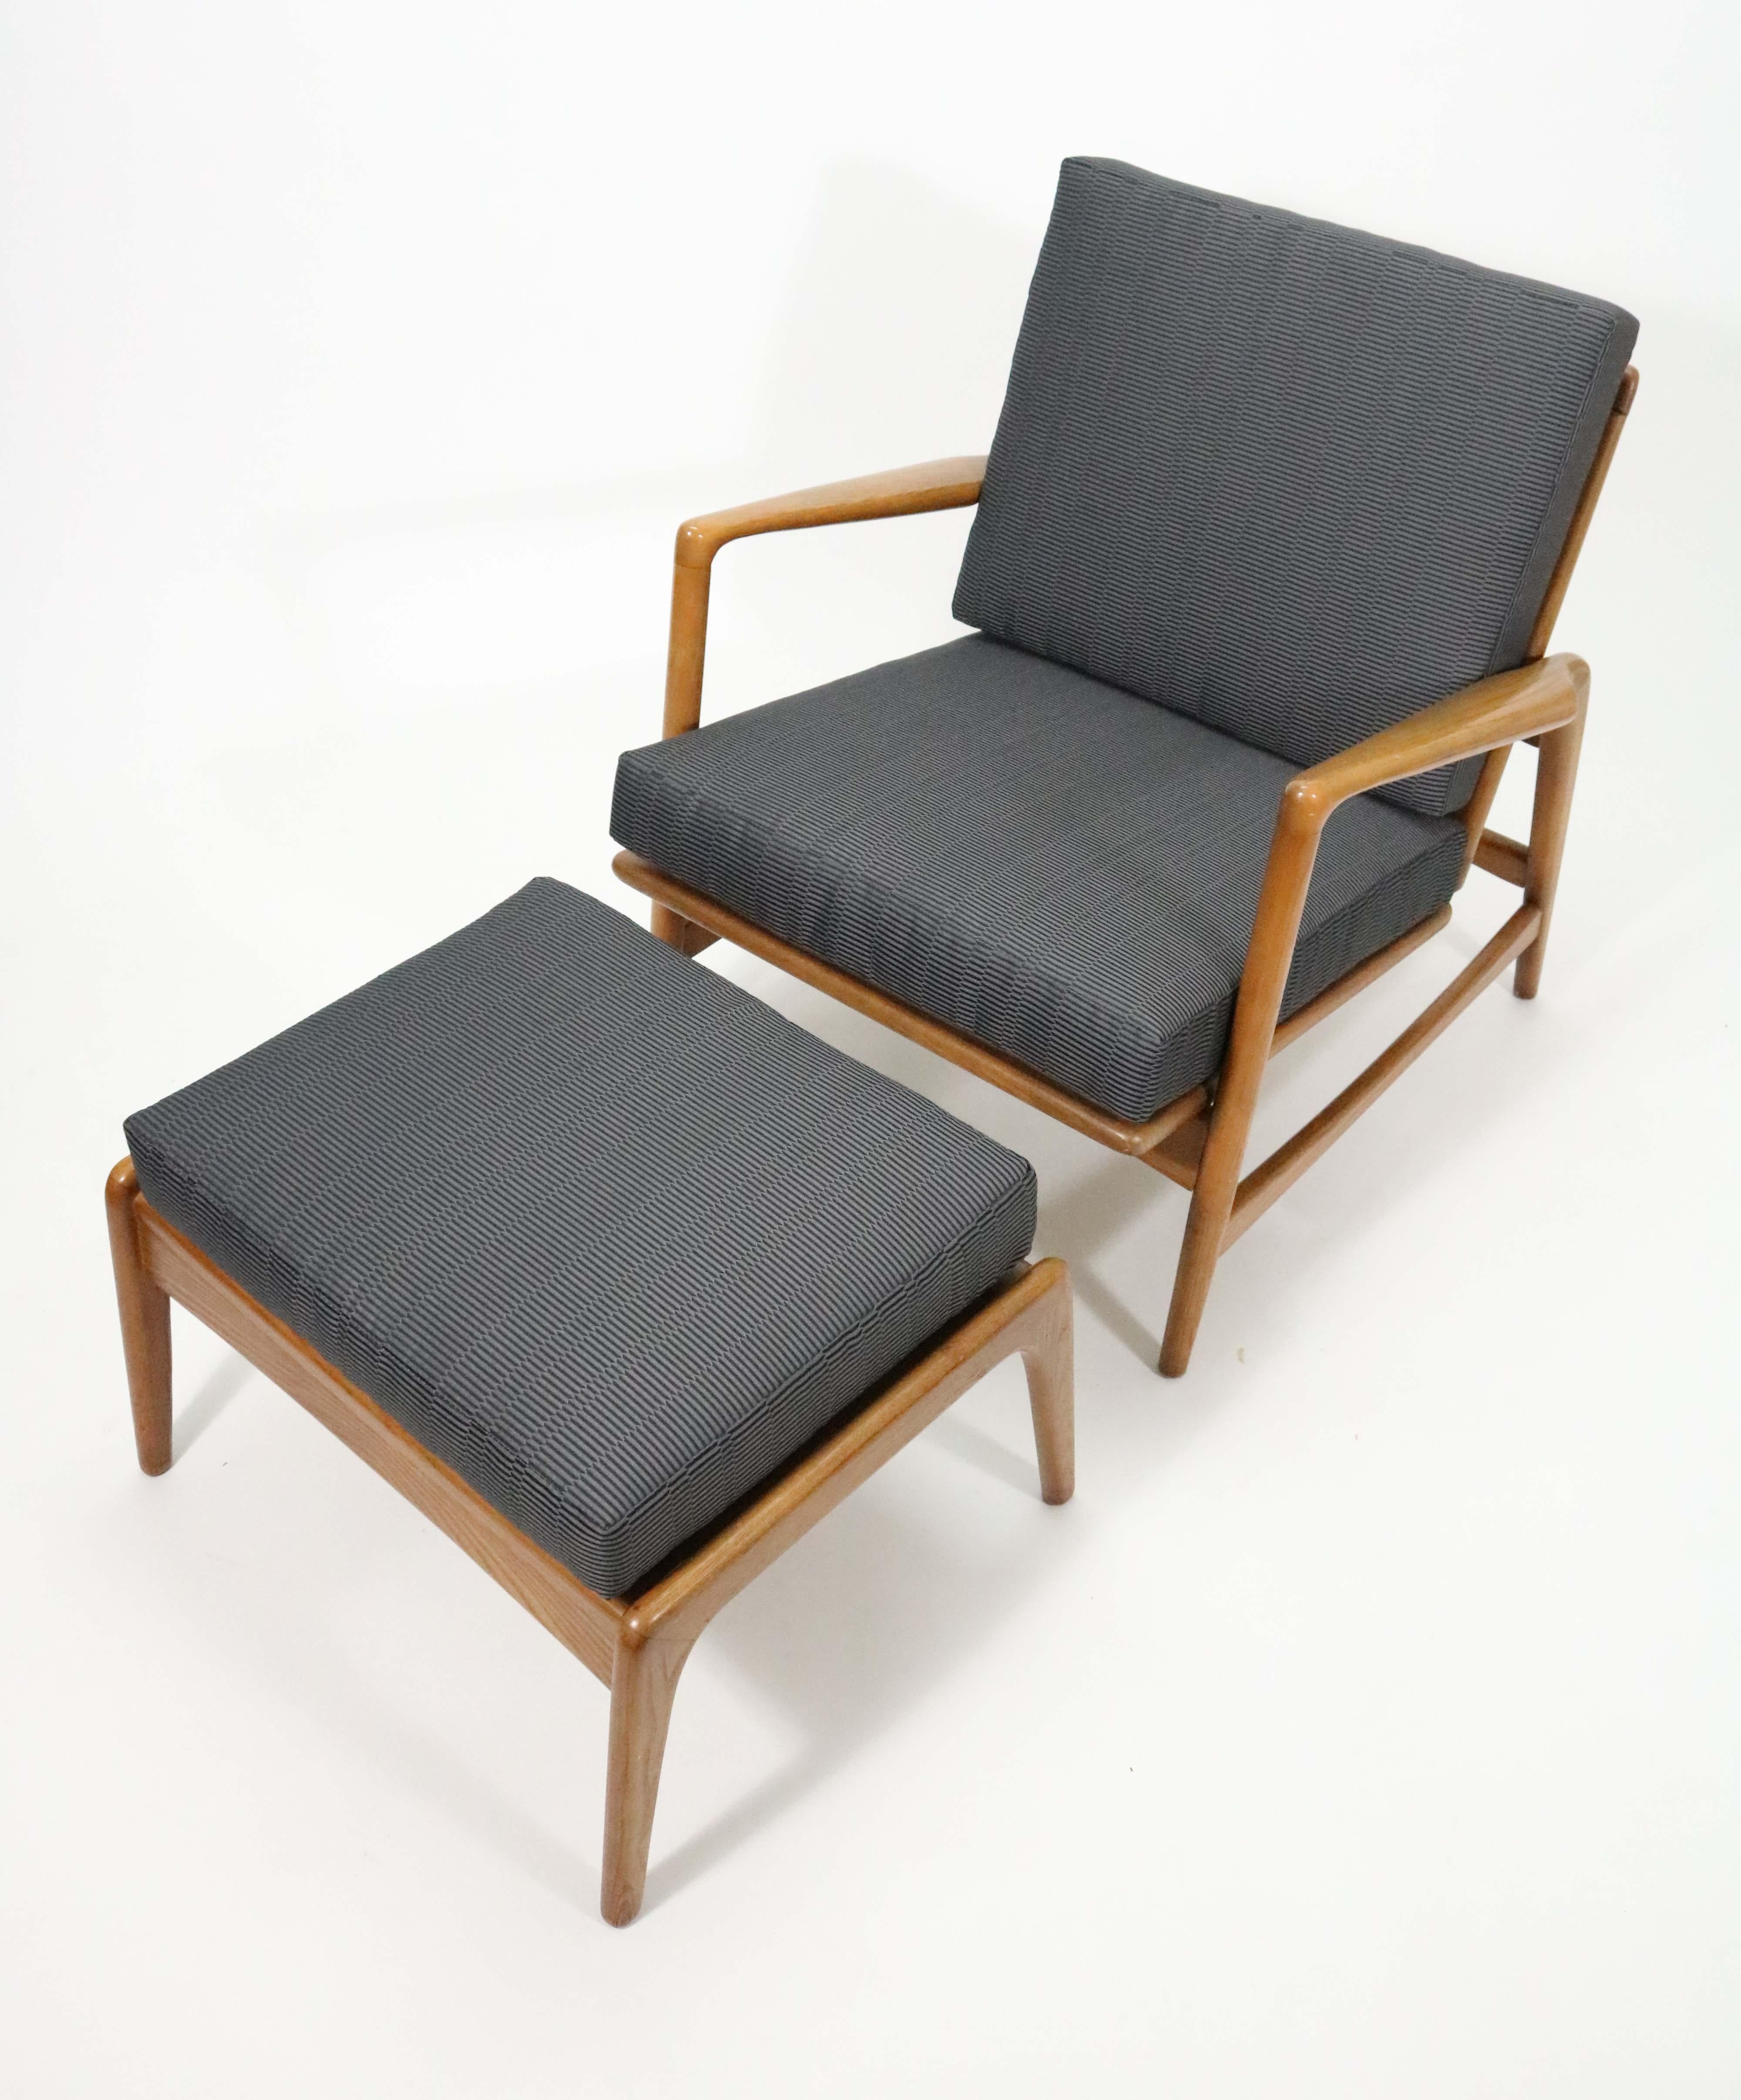 Walnut Lounge Chair and Ottoman with Adjustable Recline by Ib Kofod-Larsen 2